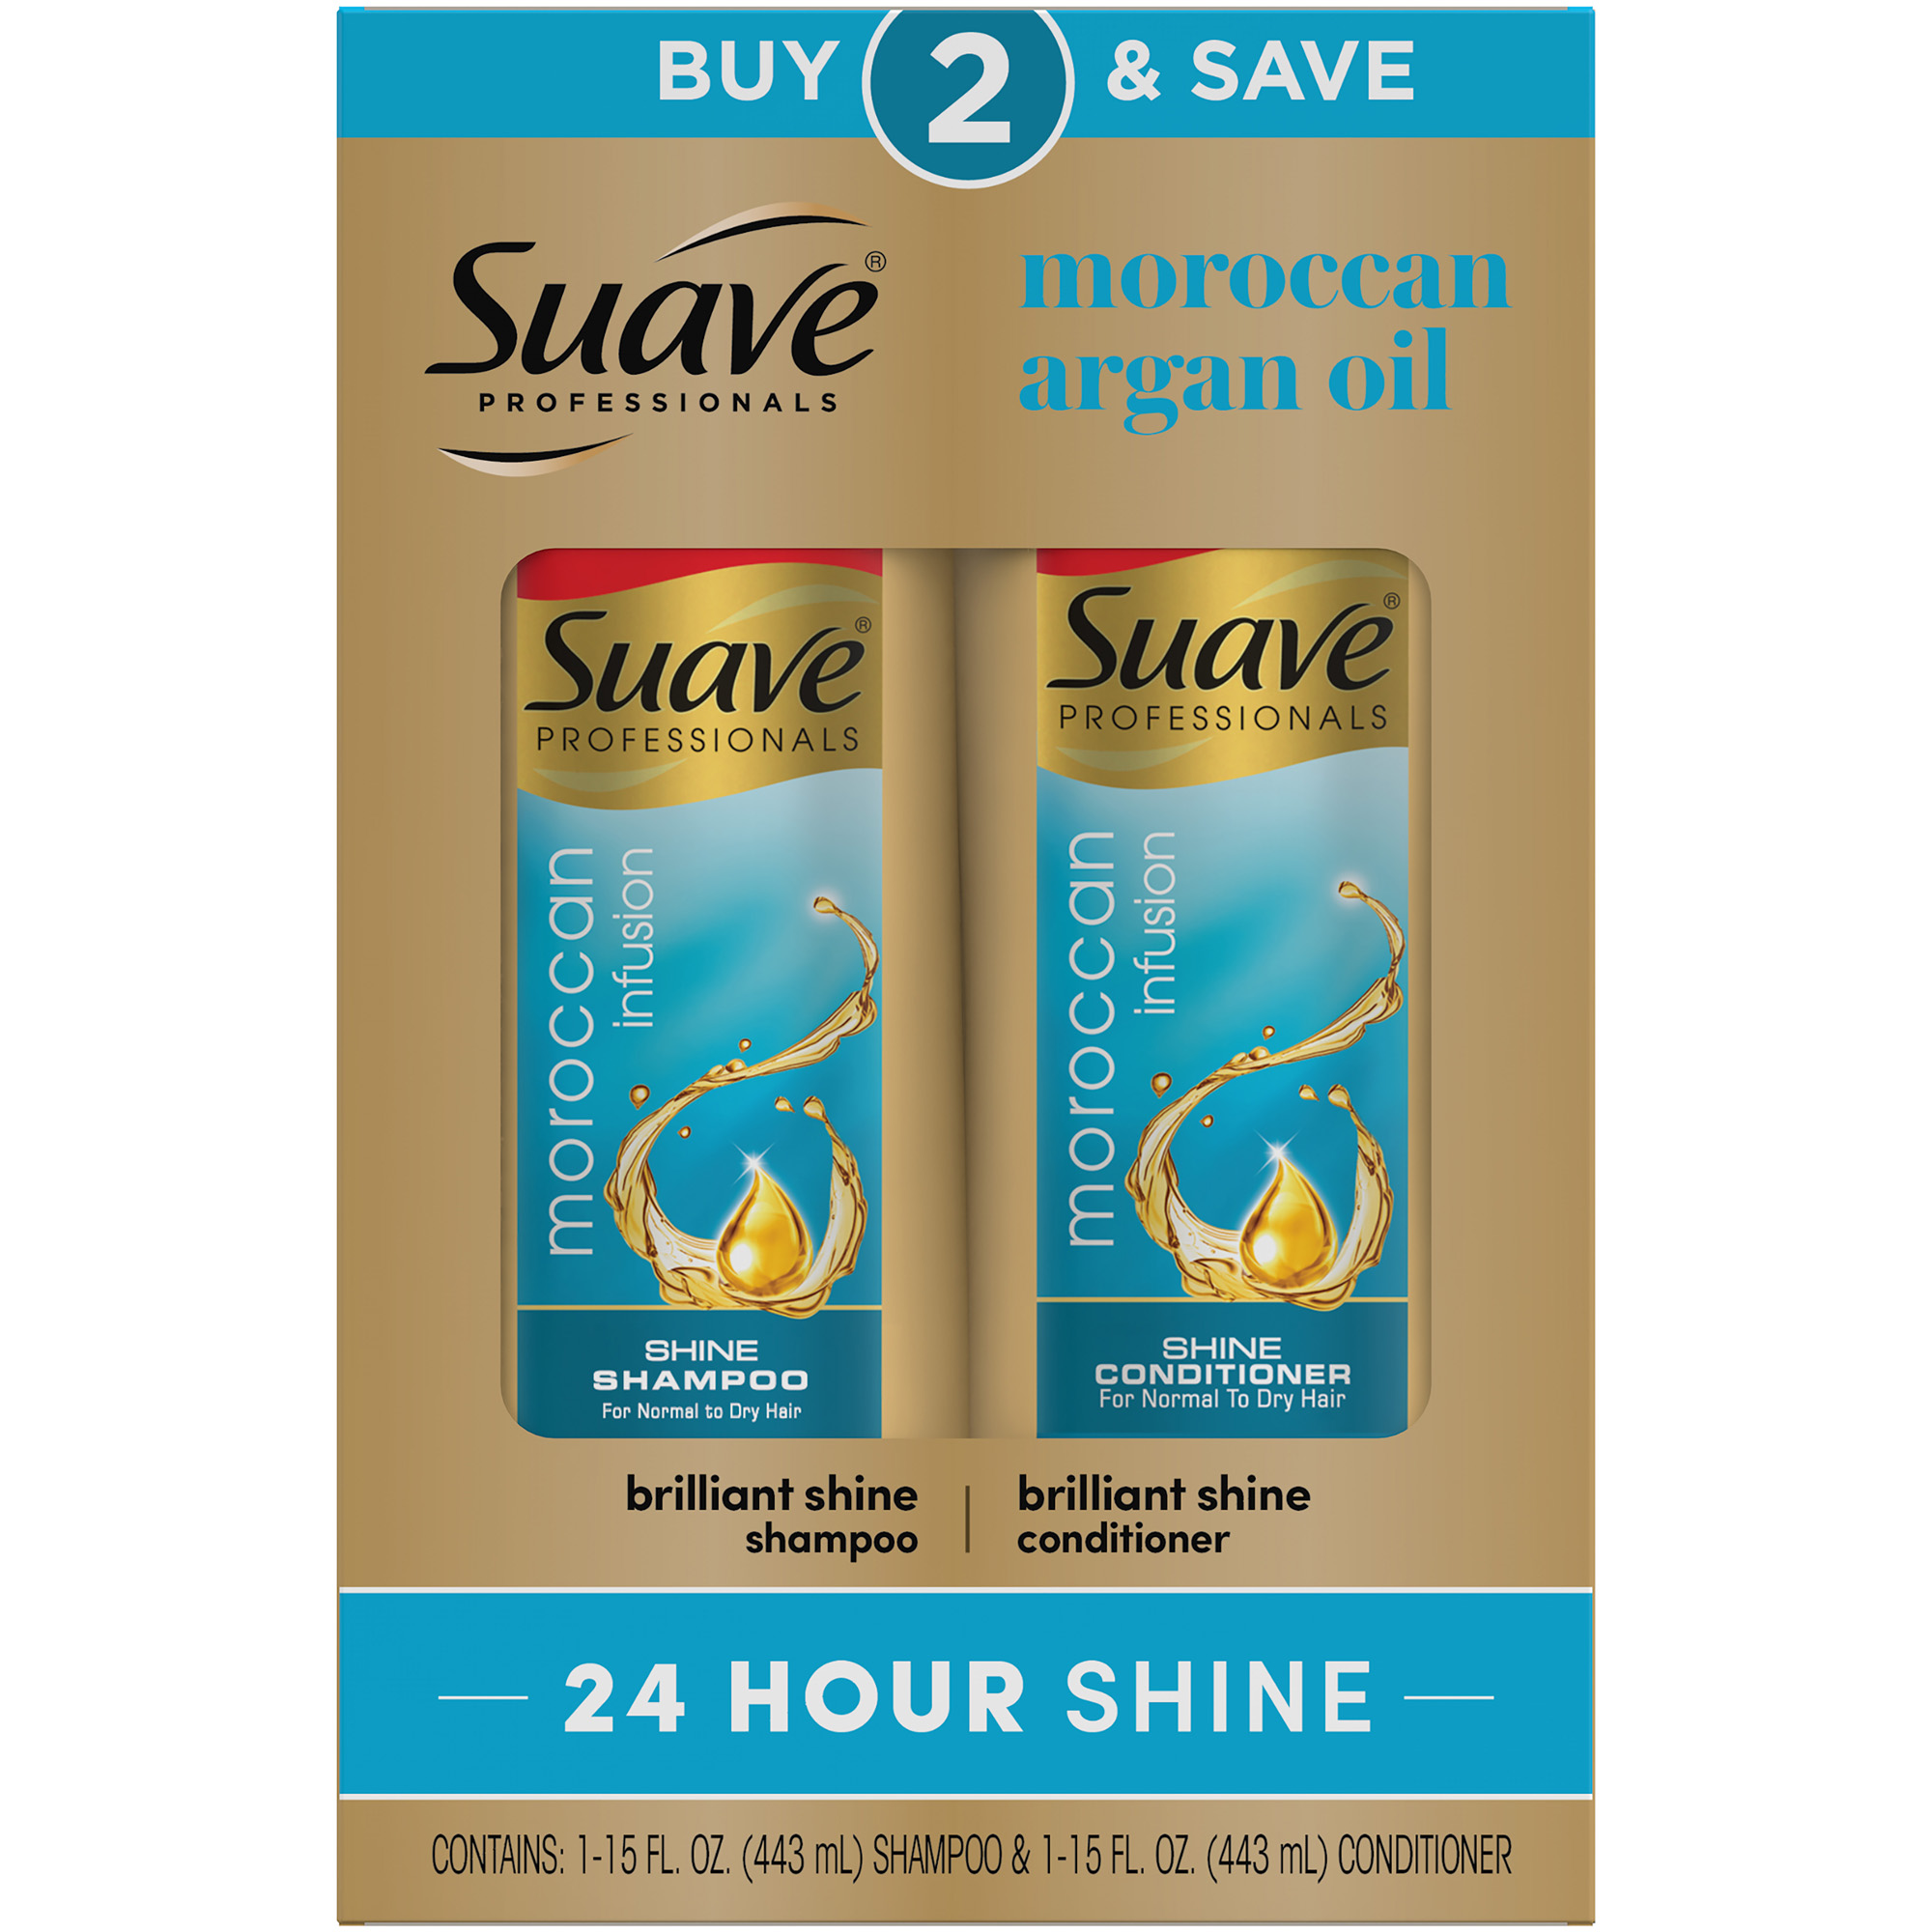 Suave Professionals Moisturizing Shine Enhancing Daily Shampoo & Conditioner with Moroccan Oil, Full Size Set, 2 Pack - image 1 of 6